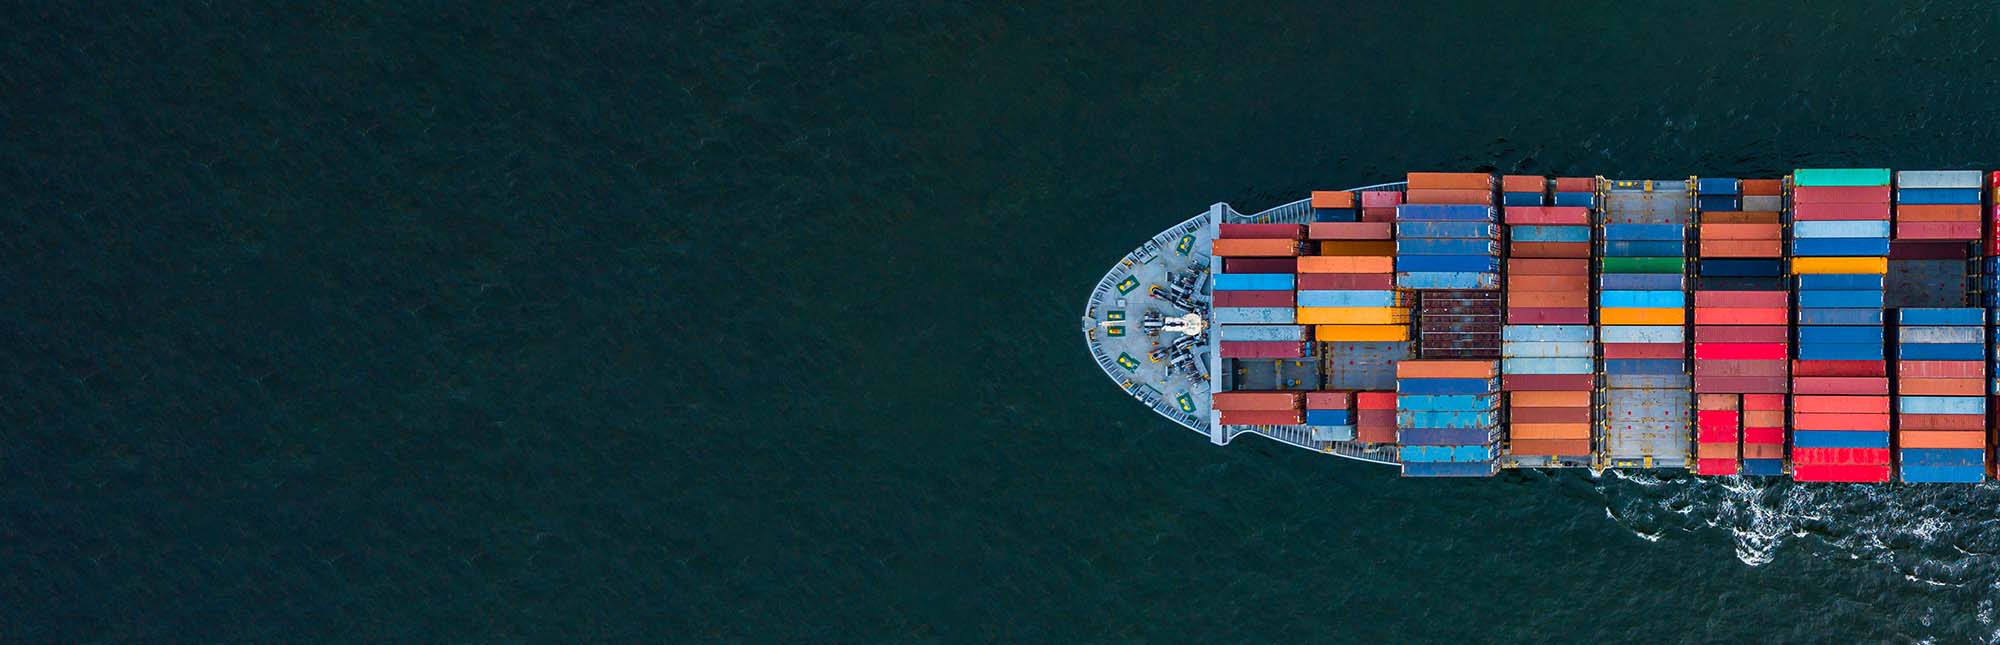 Image of a container ship